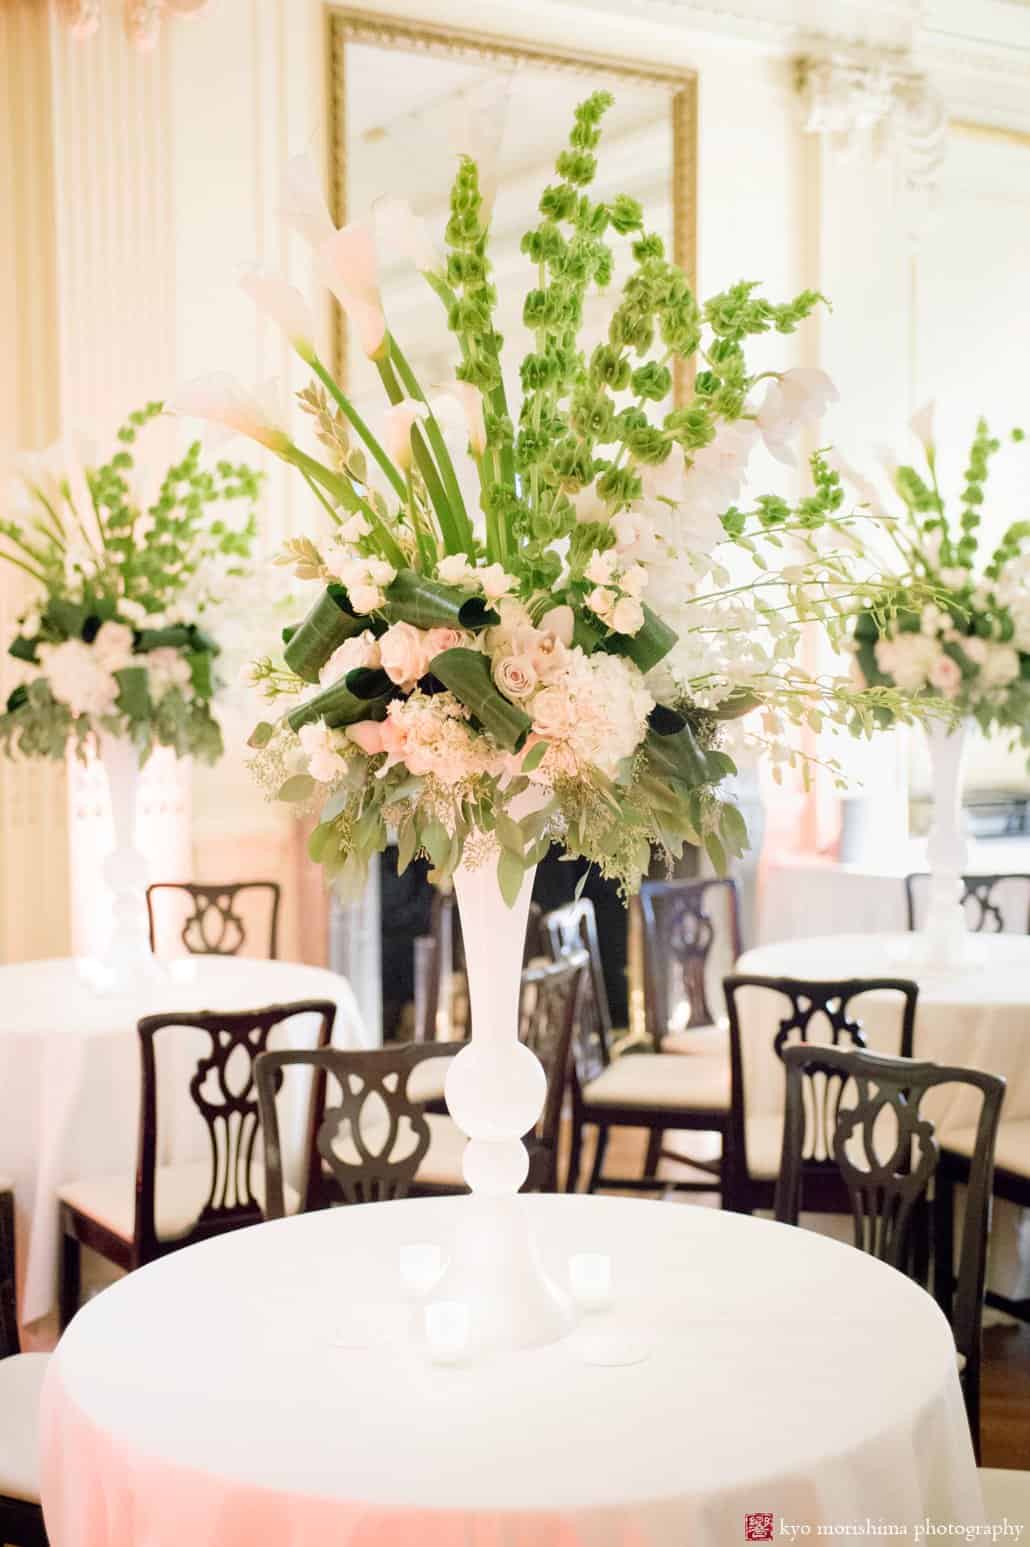 Detail of a tall white and green Franz James flower centerpiece at Lotos Club wedding, photographed by Kyo Morishima